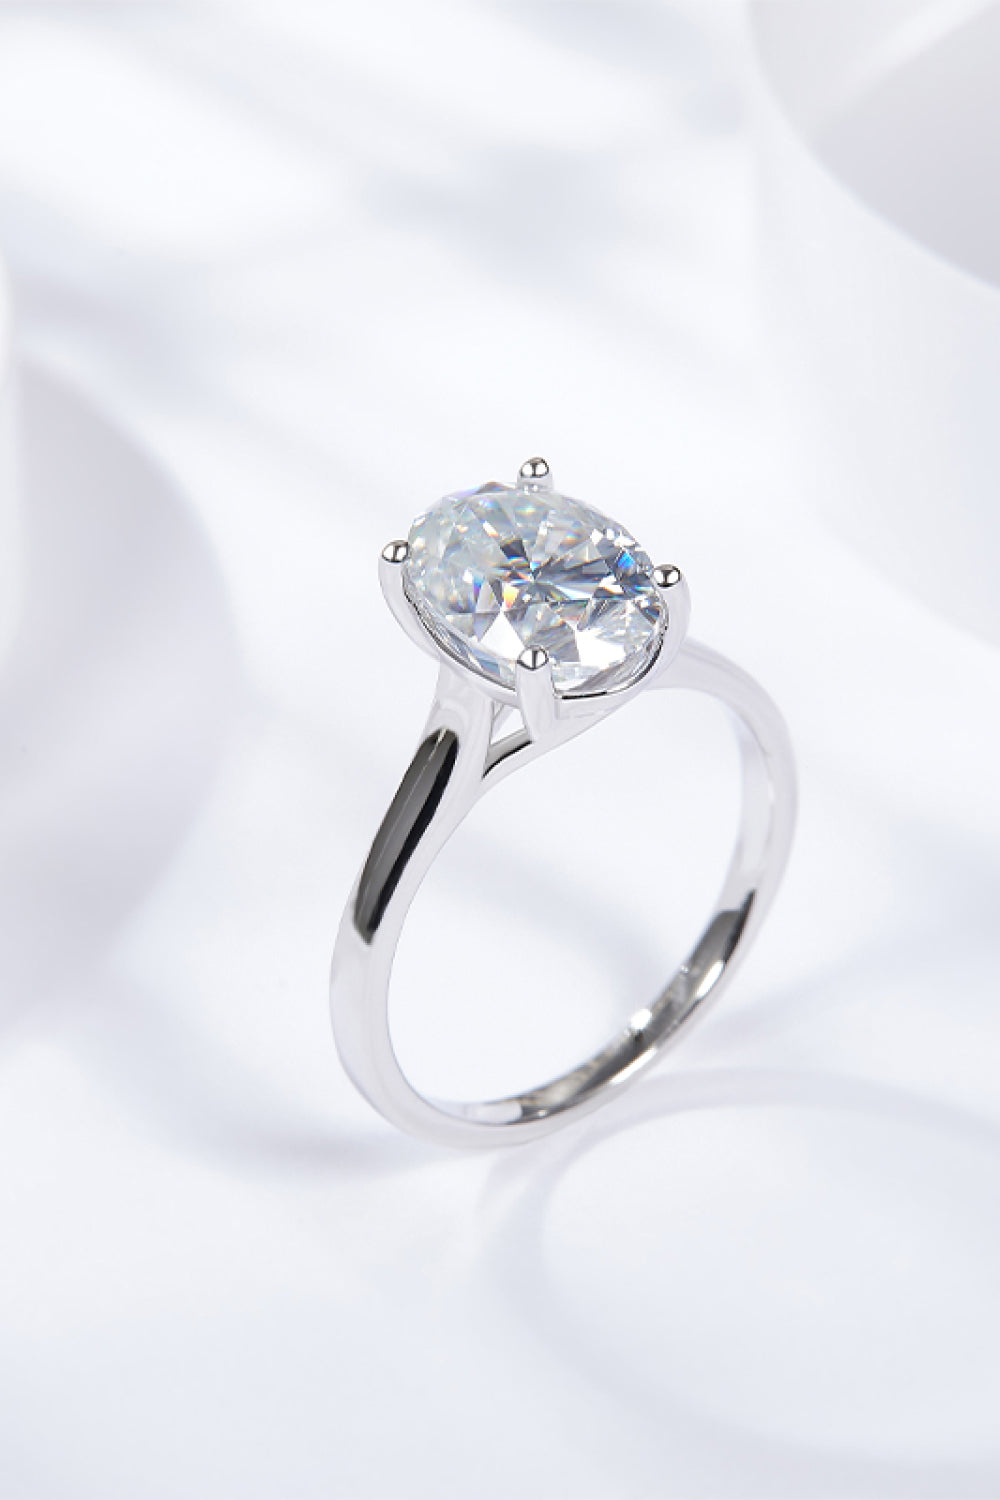 2.5 Carat Moissanite Solitaire Ring-Rings-Inspired by Justeen-Women's Clothing Boutique in Chicago, Illinois